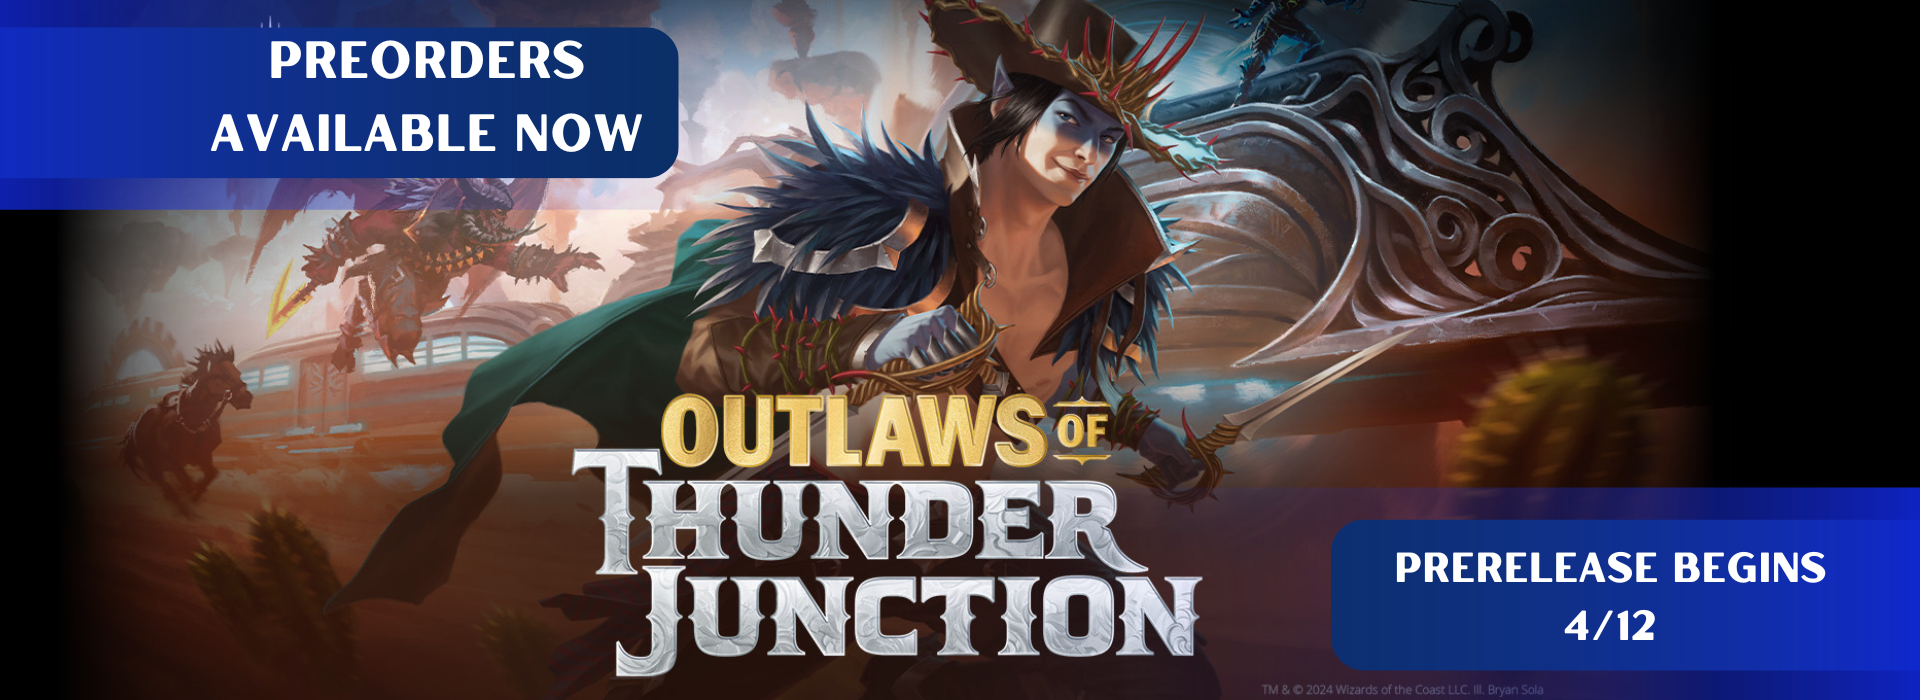 An advertisement for in-store events for Magic: the Gathering's Outlaws of Thunder Junction Prerelease